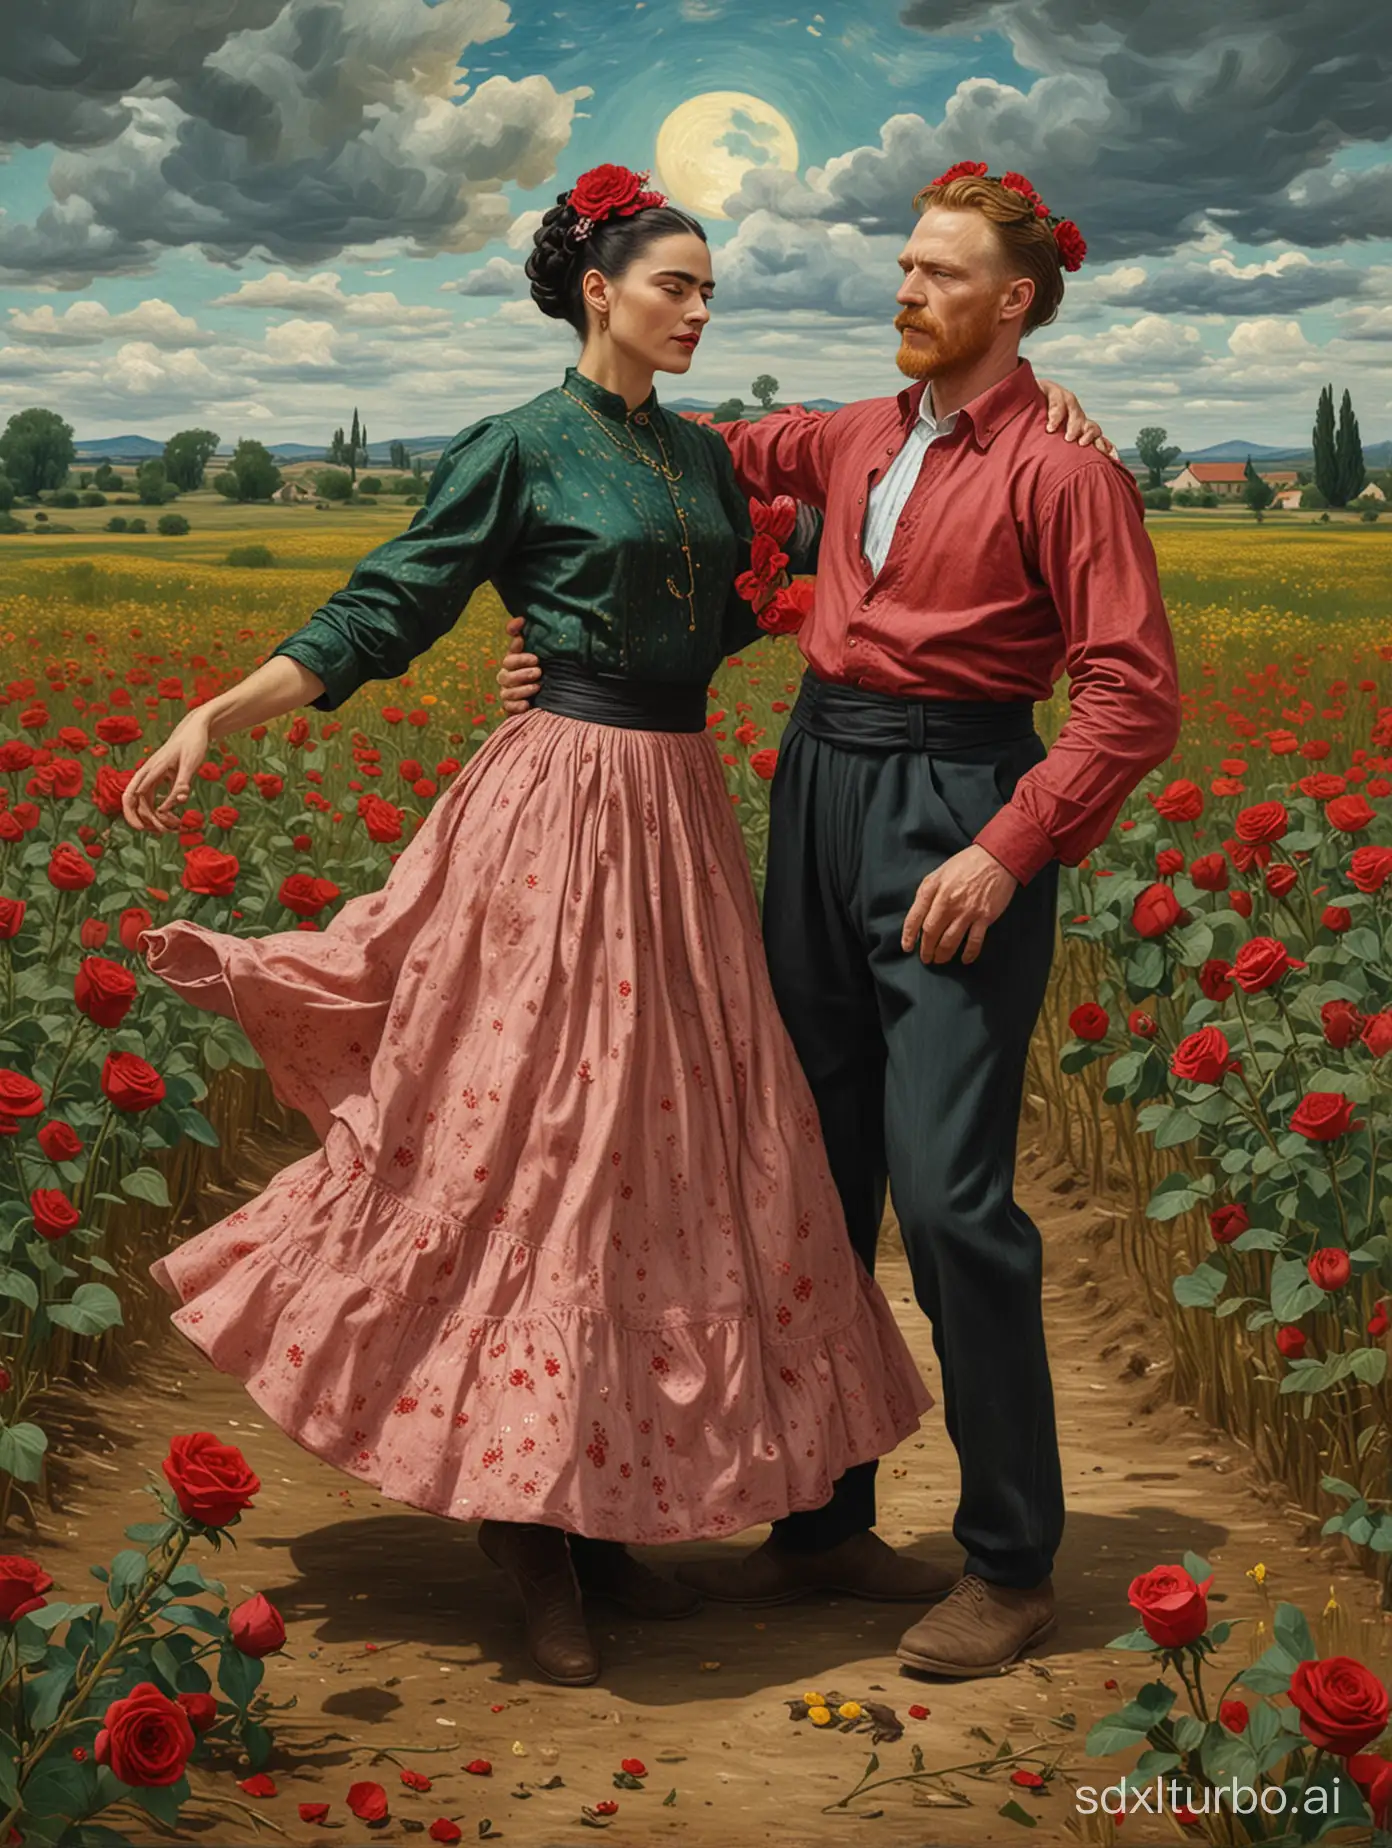 Van-Gogh-and-Kahlo-Dancing-on-a-Roses-Demise-Amidst-Lush-Fields